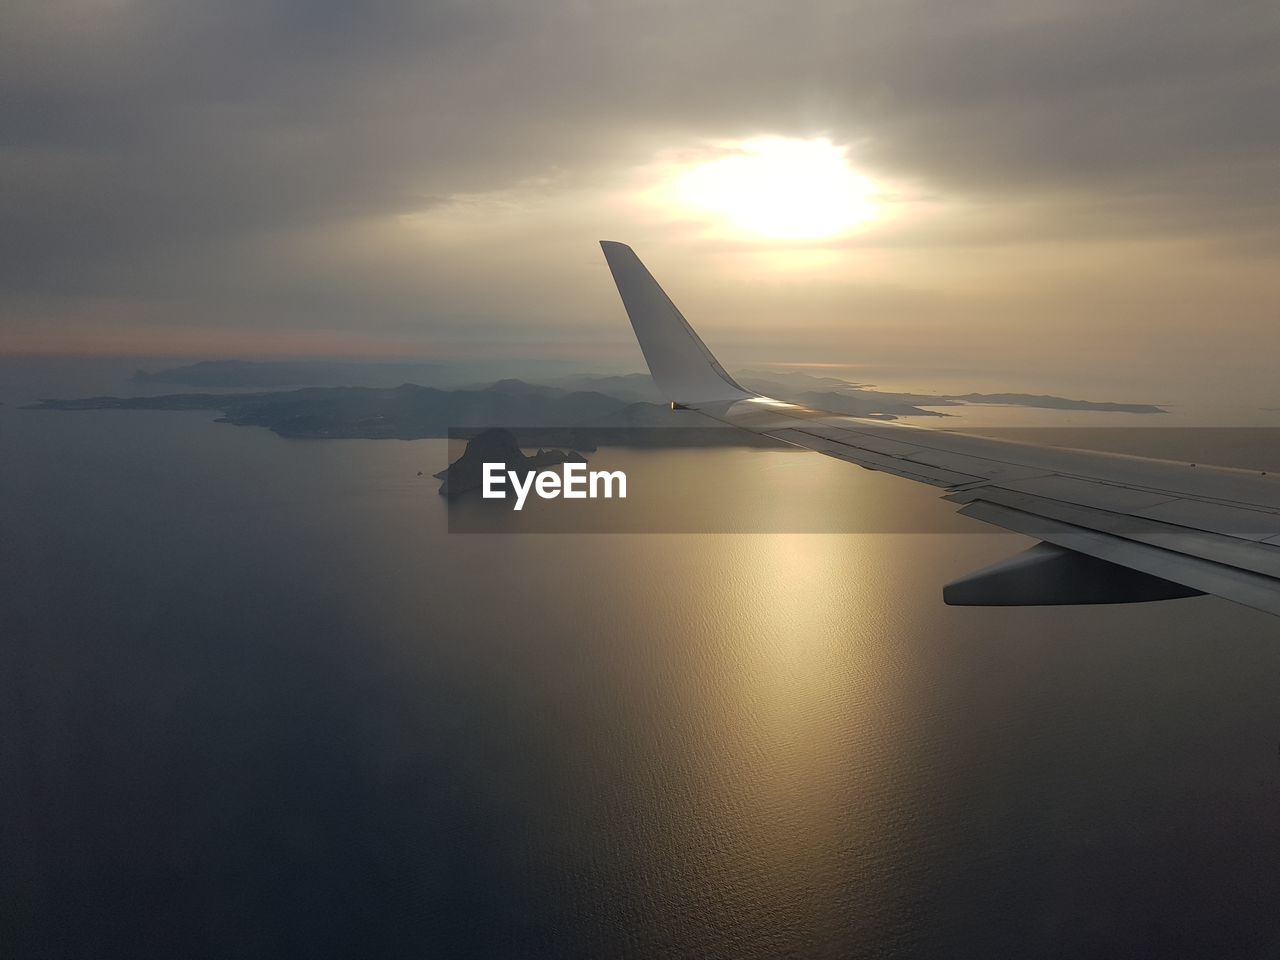 Cropped image of airplane over sea against sky